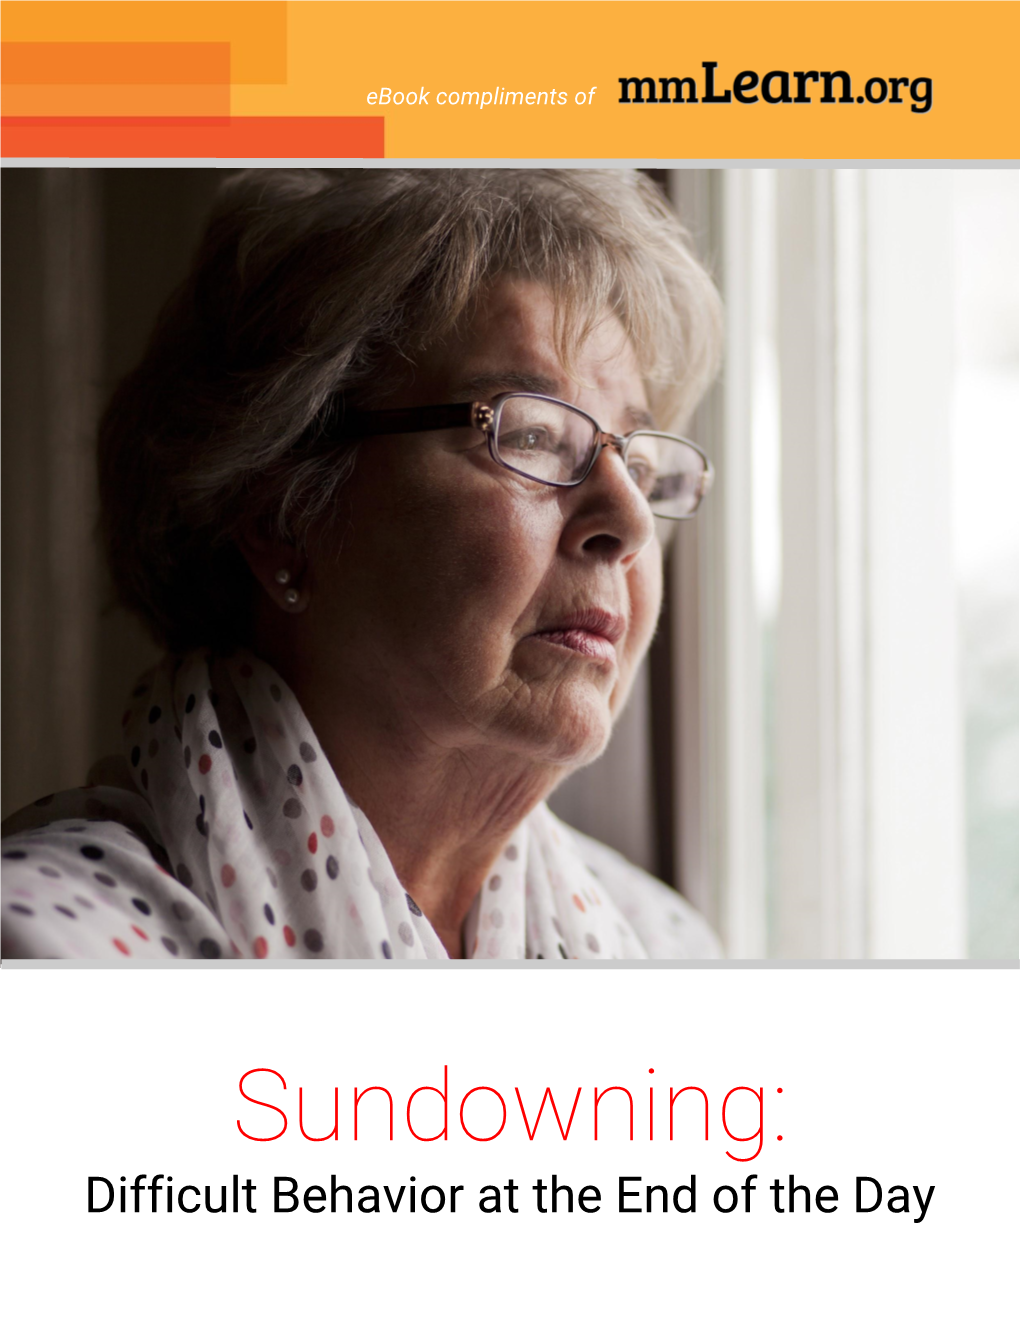 Sundowning Syndrome Is a Complex Medical Condition That Occurs When a Person Becomes Confused Or Agitated at Nightfall